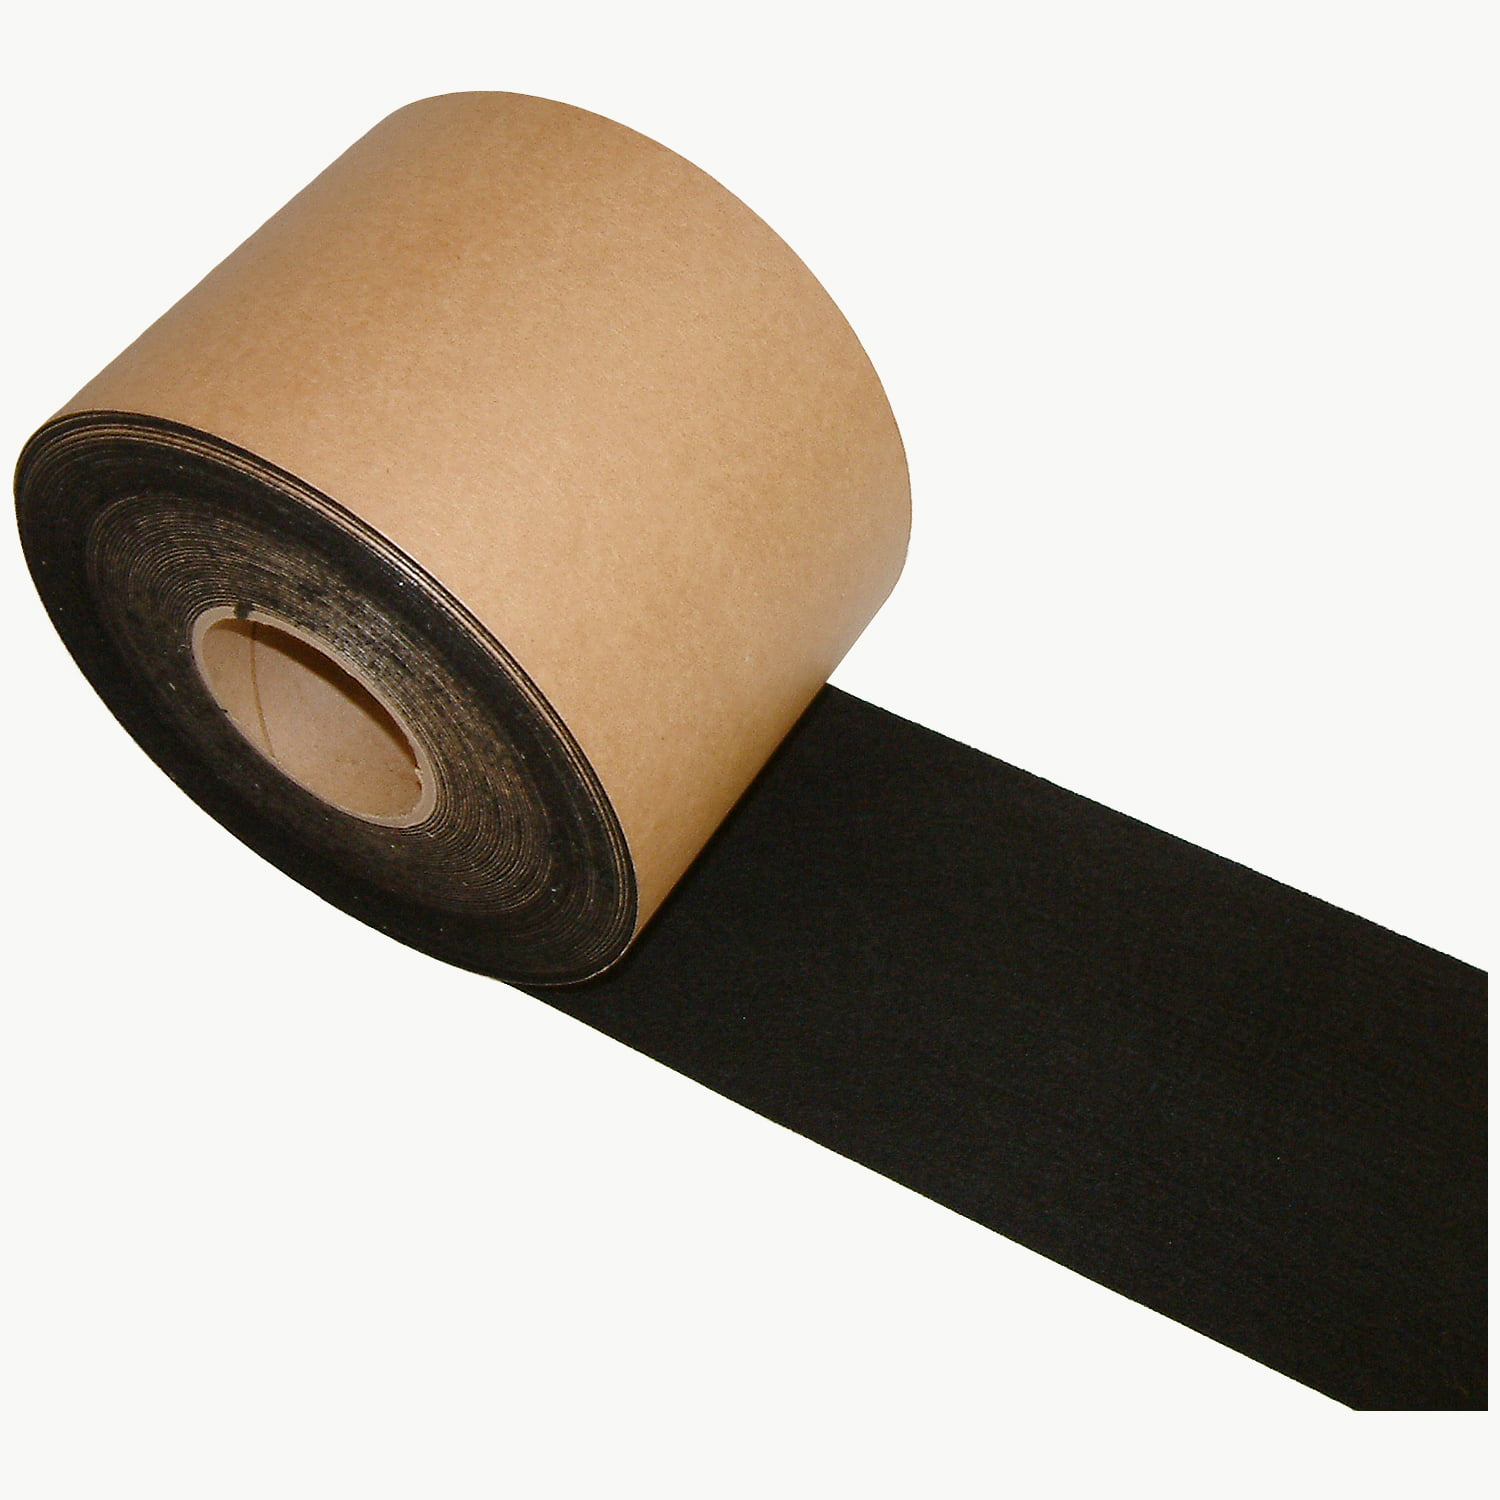 FindTape Polyester Felt Tape [1mm thick] (FELT-06): 12 in. x 75 ft